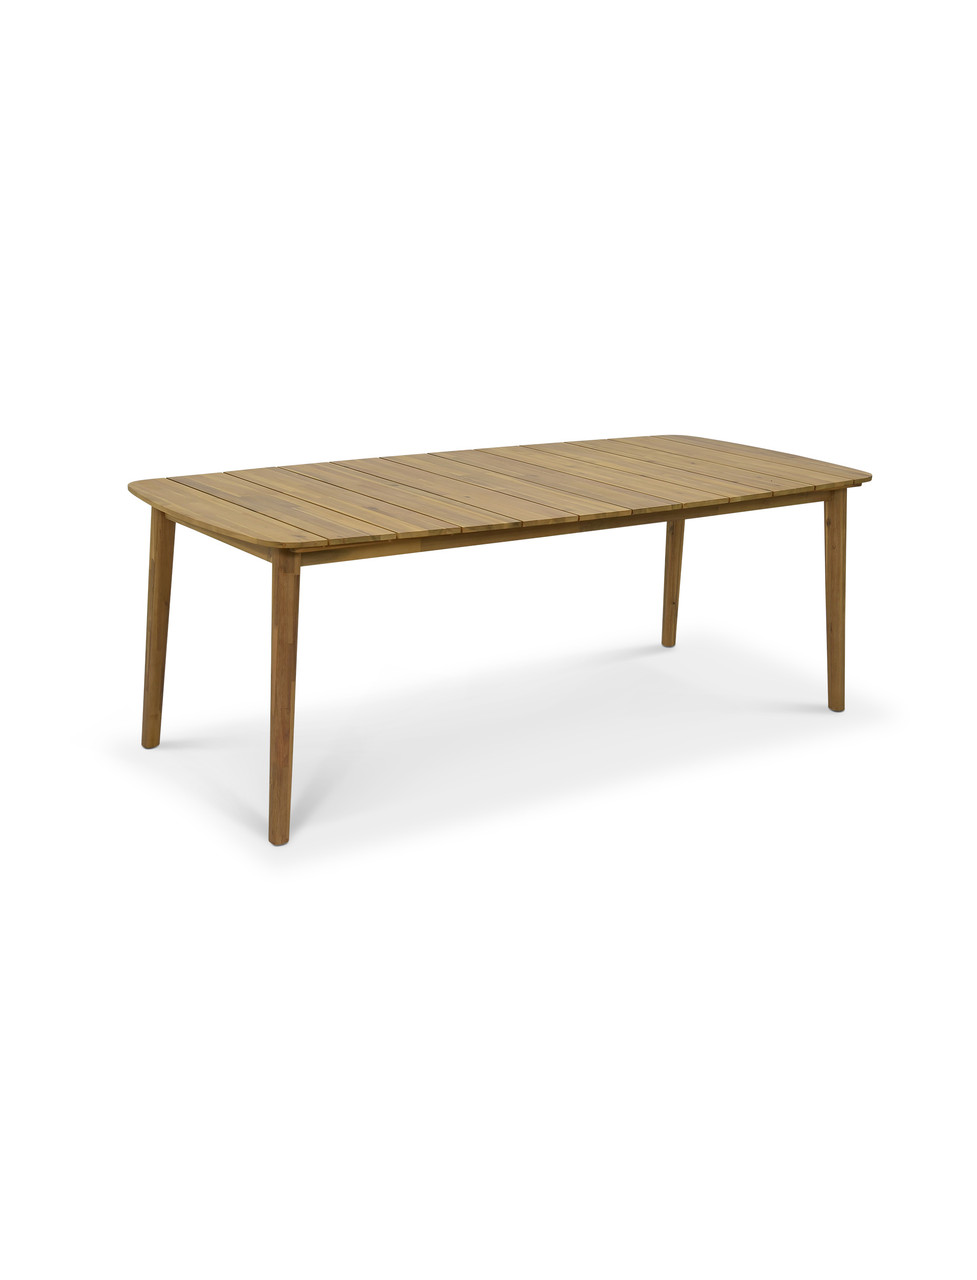 Harford Dining Table Large Natural | Garden Trading